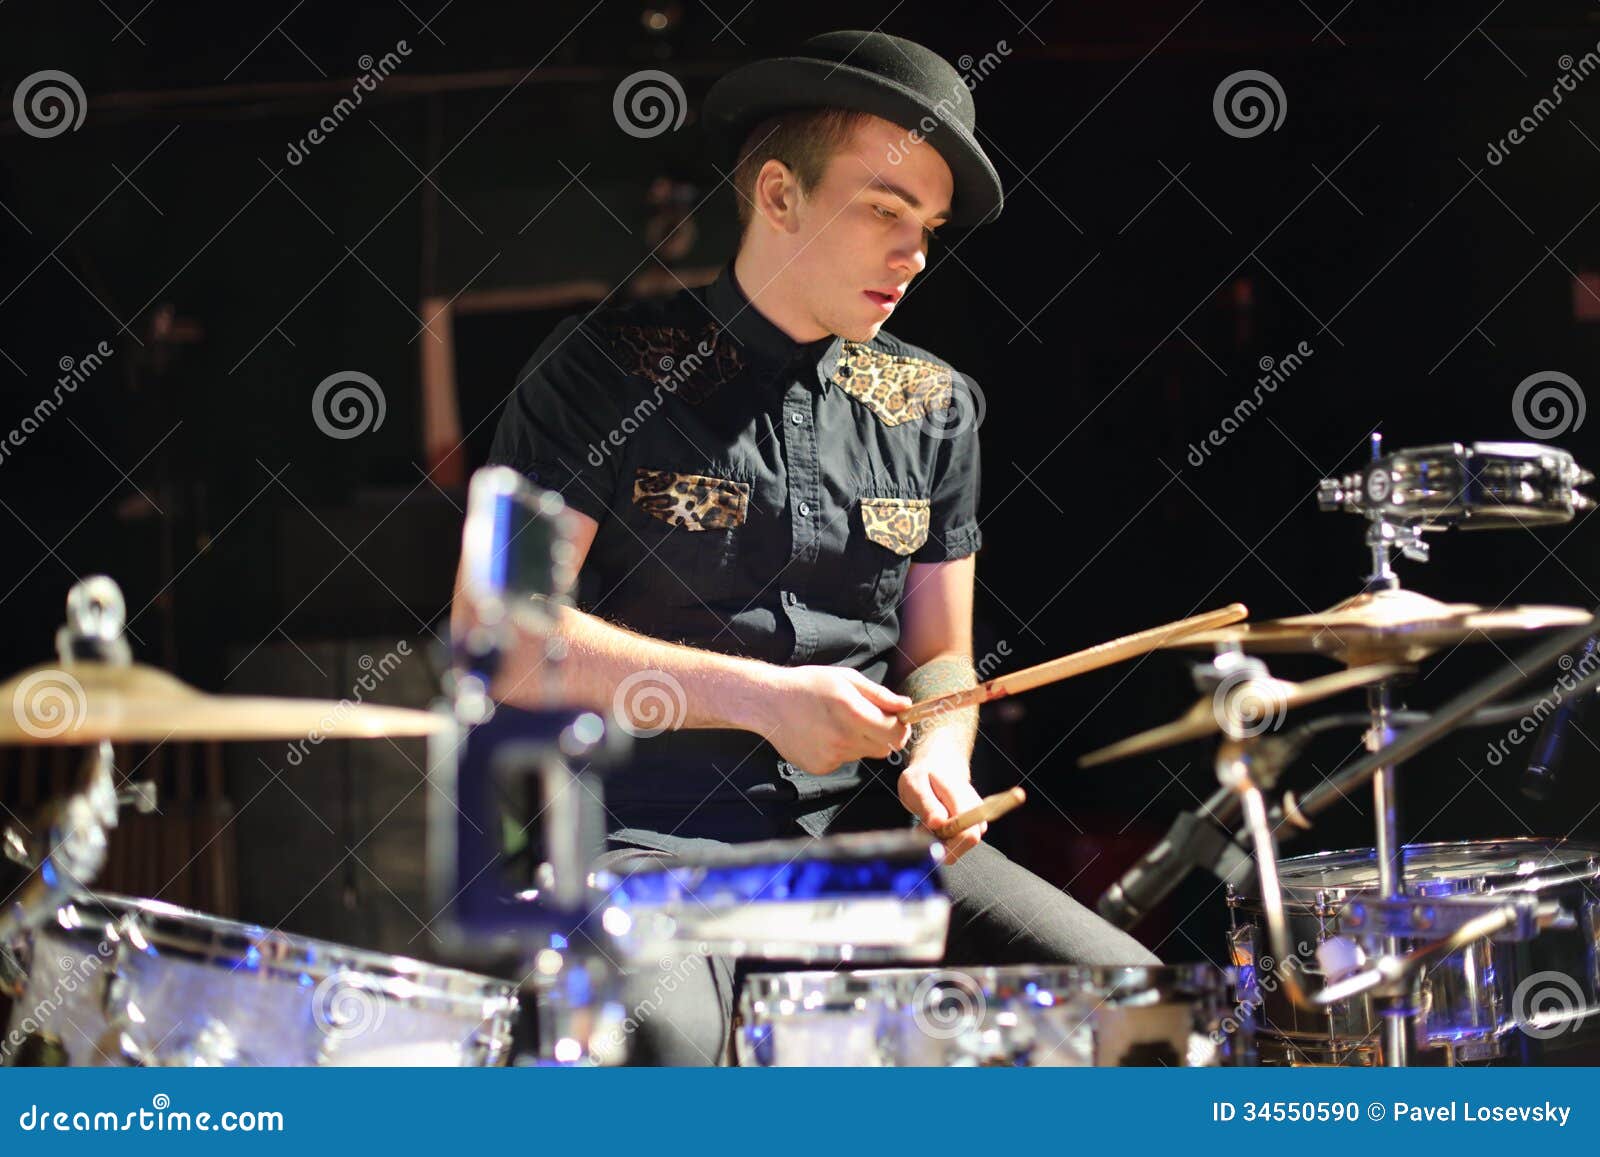 Handsome Young Man in Hat Plays Drum Set Stock Photo - Image of bass ...